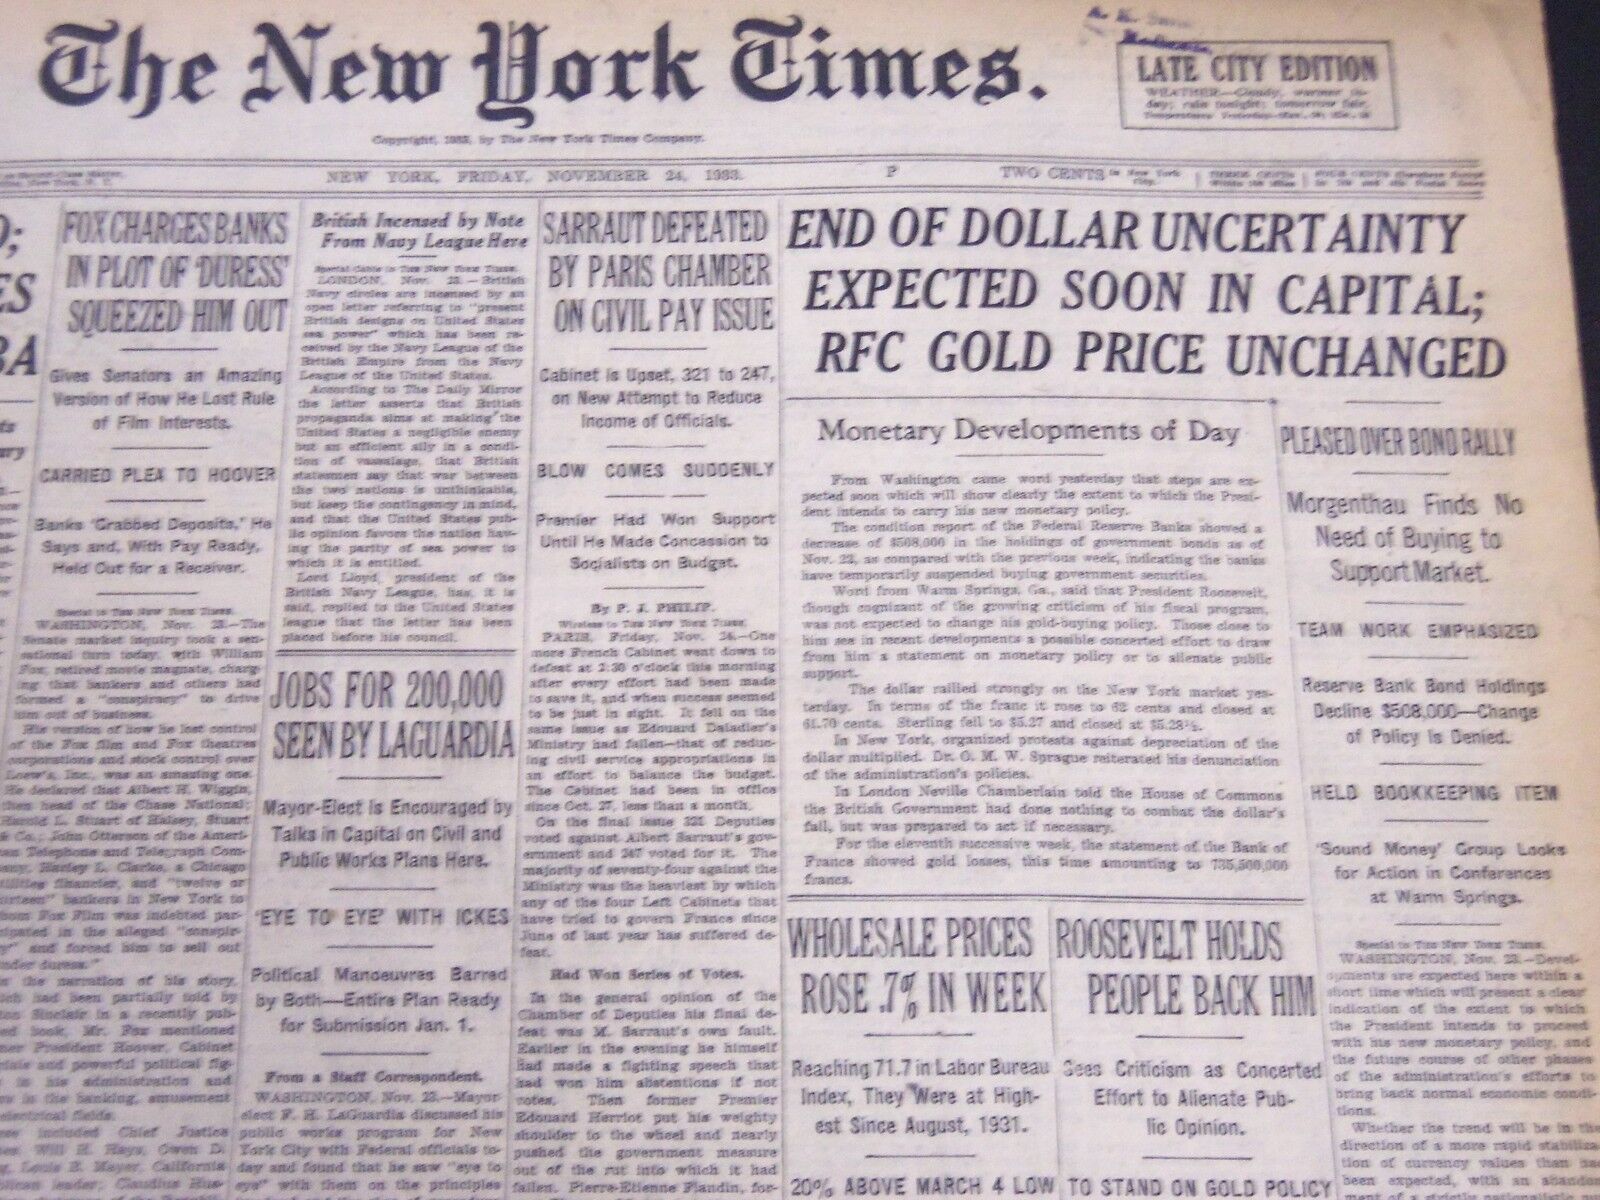 1933 NOVEMBER 24 NEW YORK TIMES - END OF DOLLAR UNCERTAINTY EXPECTED - NT 5204